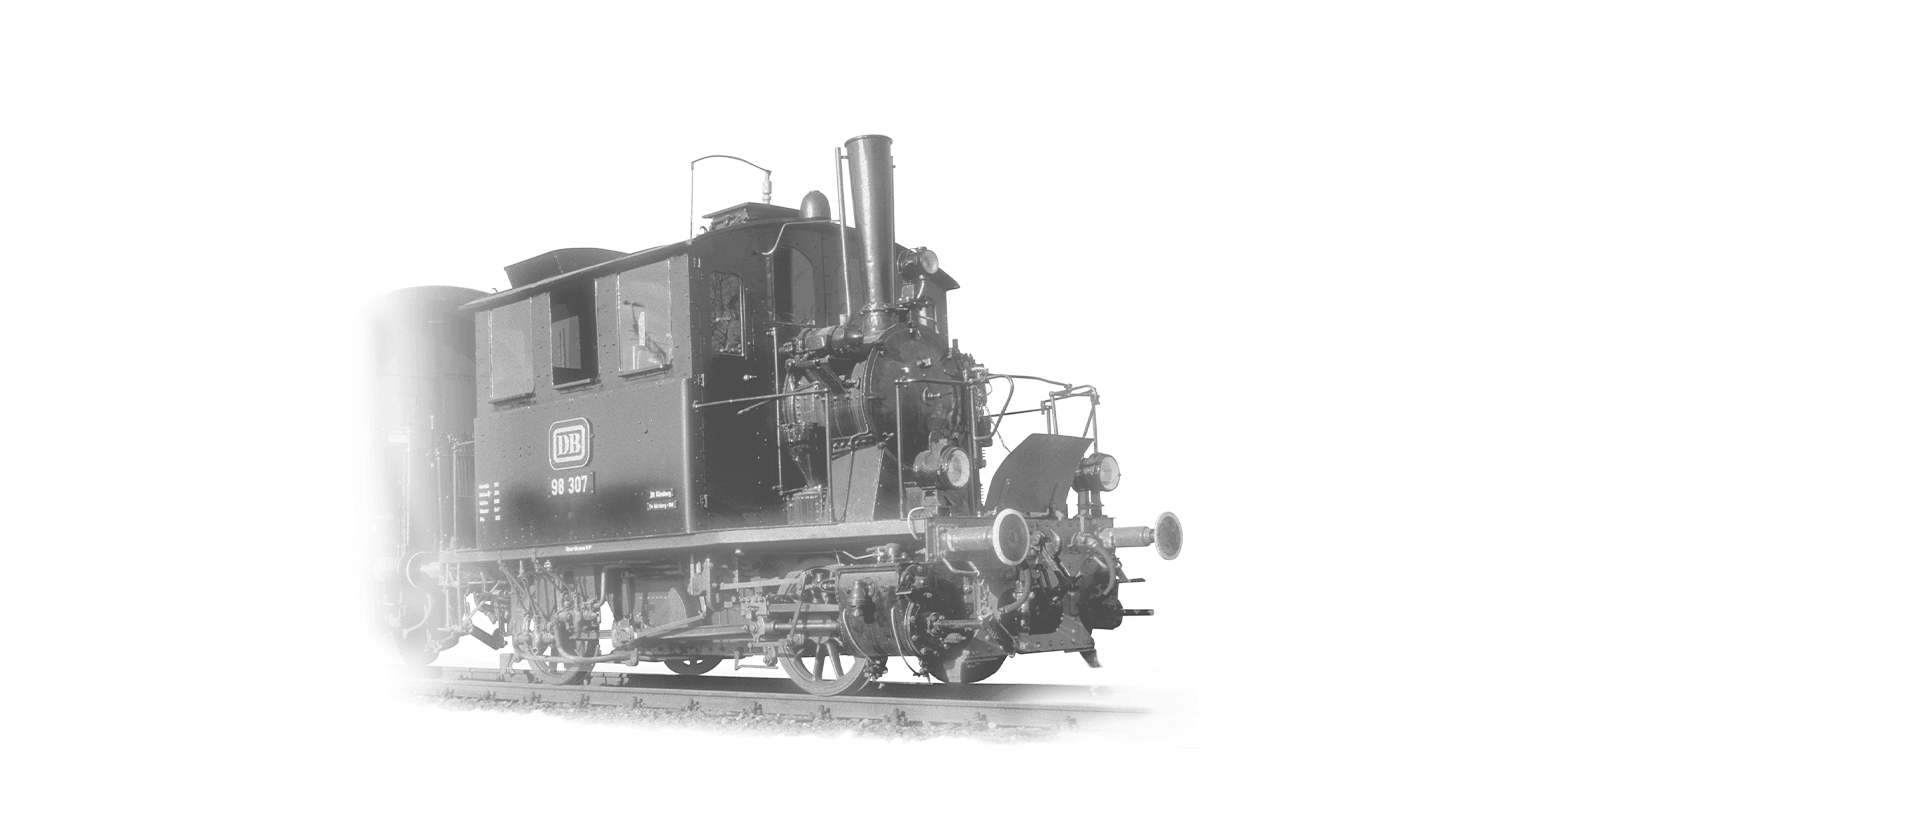 The locomotive 98-307 is coming towards the camera in black and white